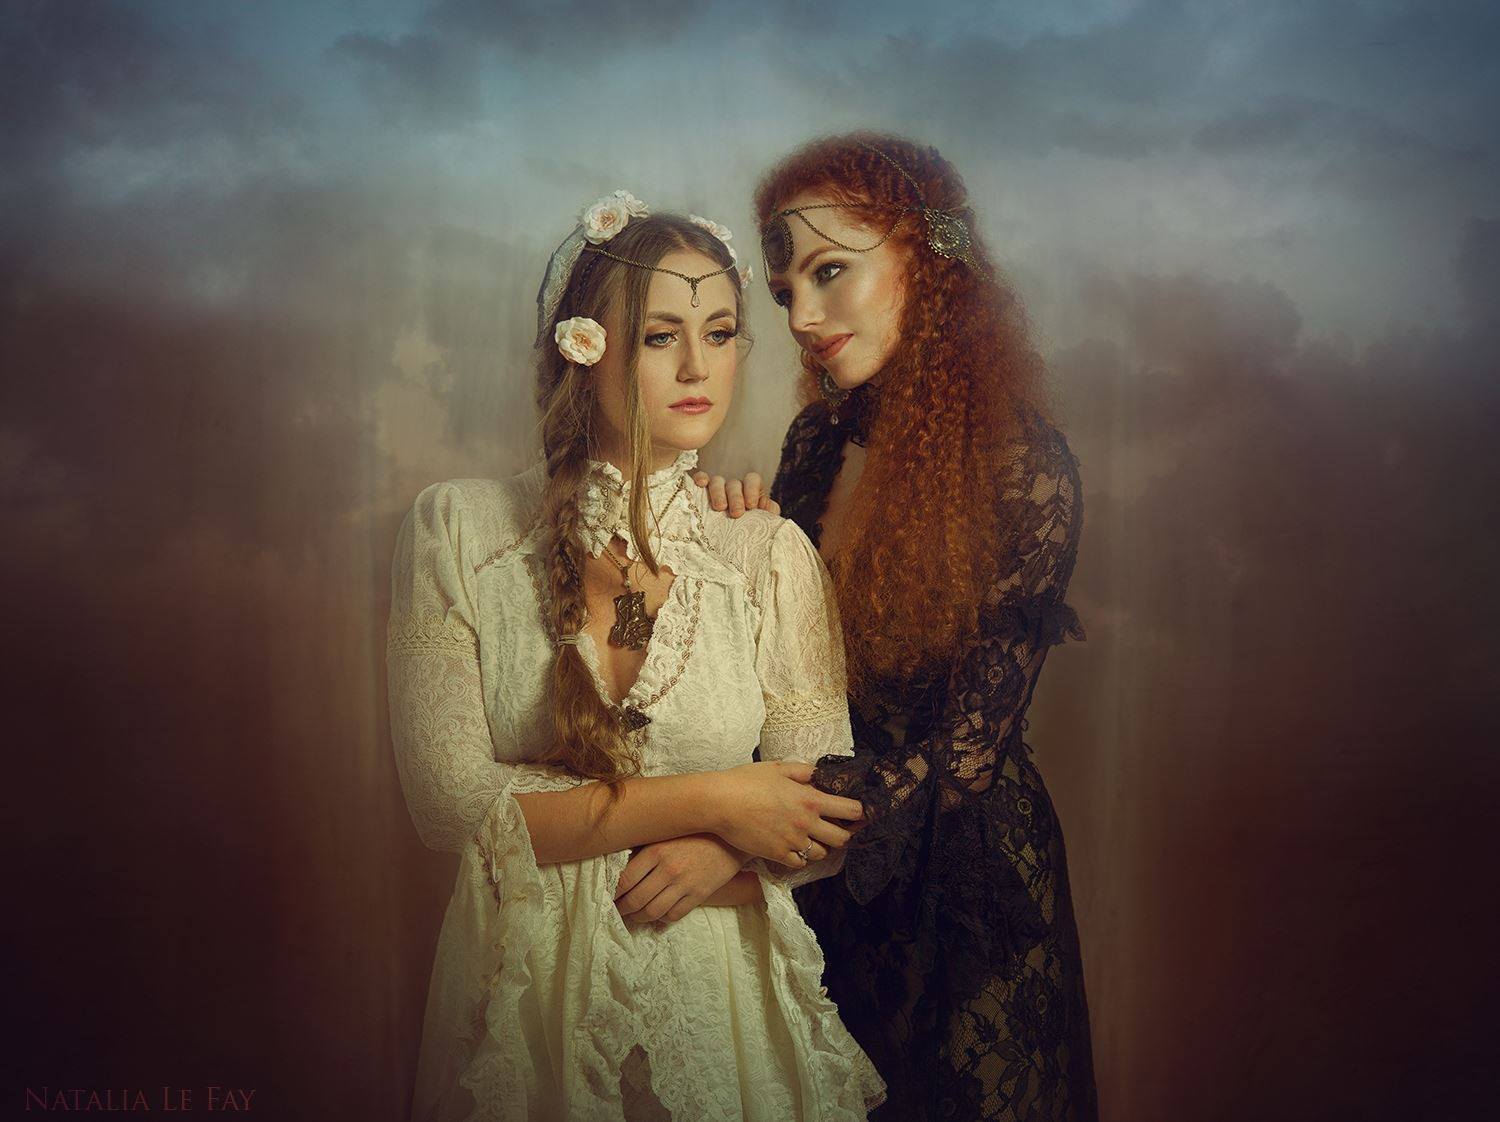 Photo by Natalia Le Fay - Art<br />Makeup: Adicia Mirage<br />Jewellery by Elegant Curiosities<br />Dress by Somnia Romantica<br />Models: Willow Model and Myrna Moonstruck